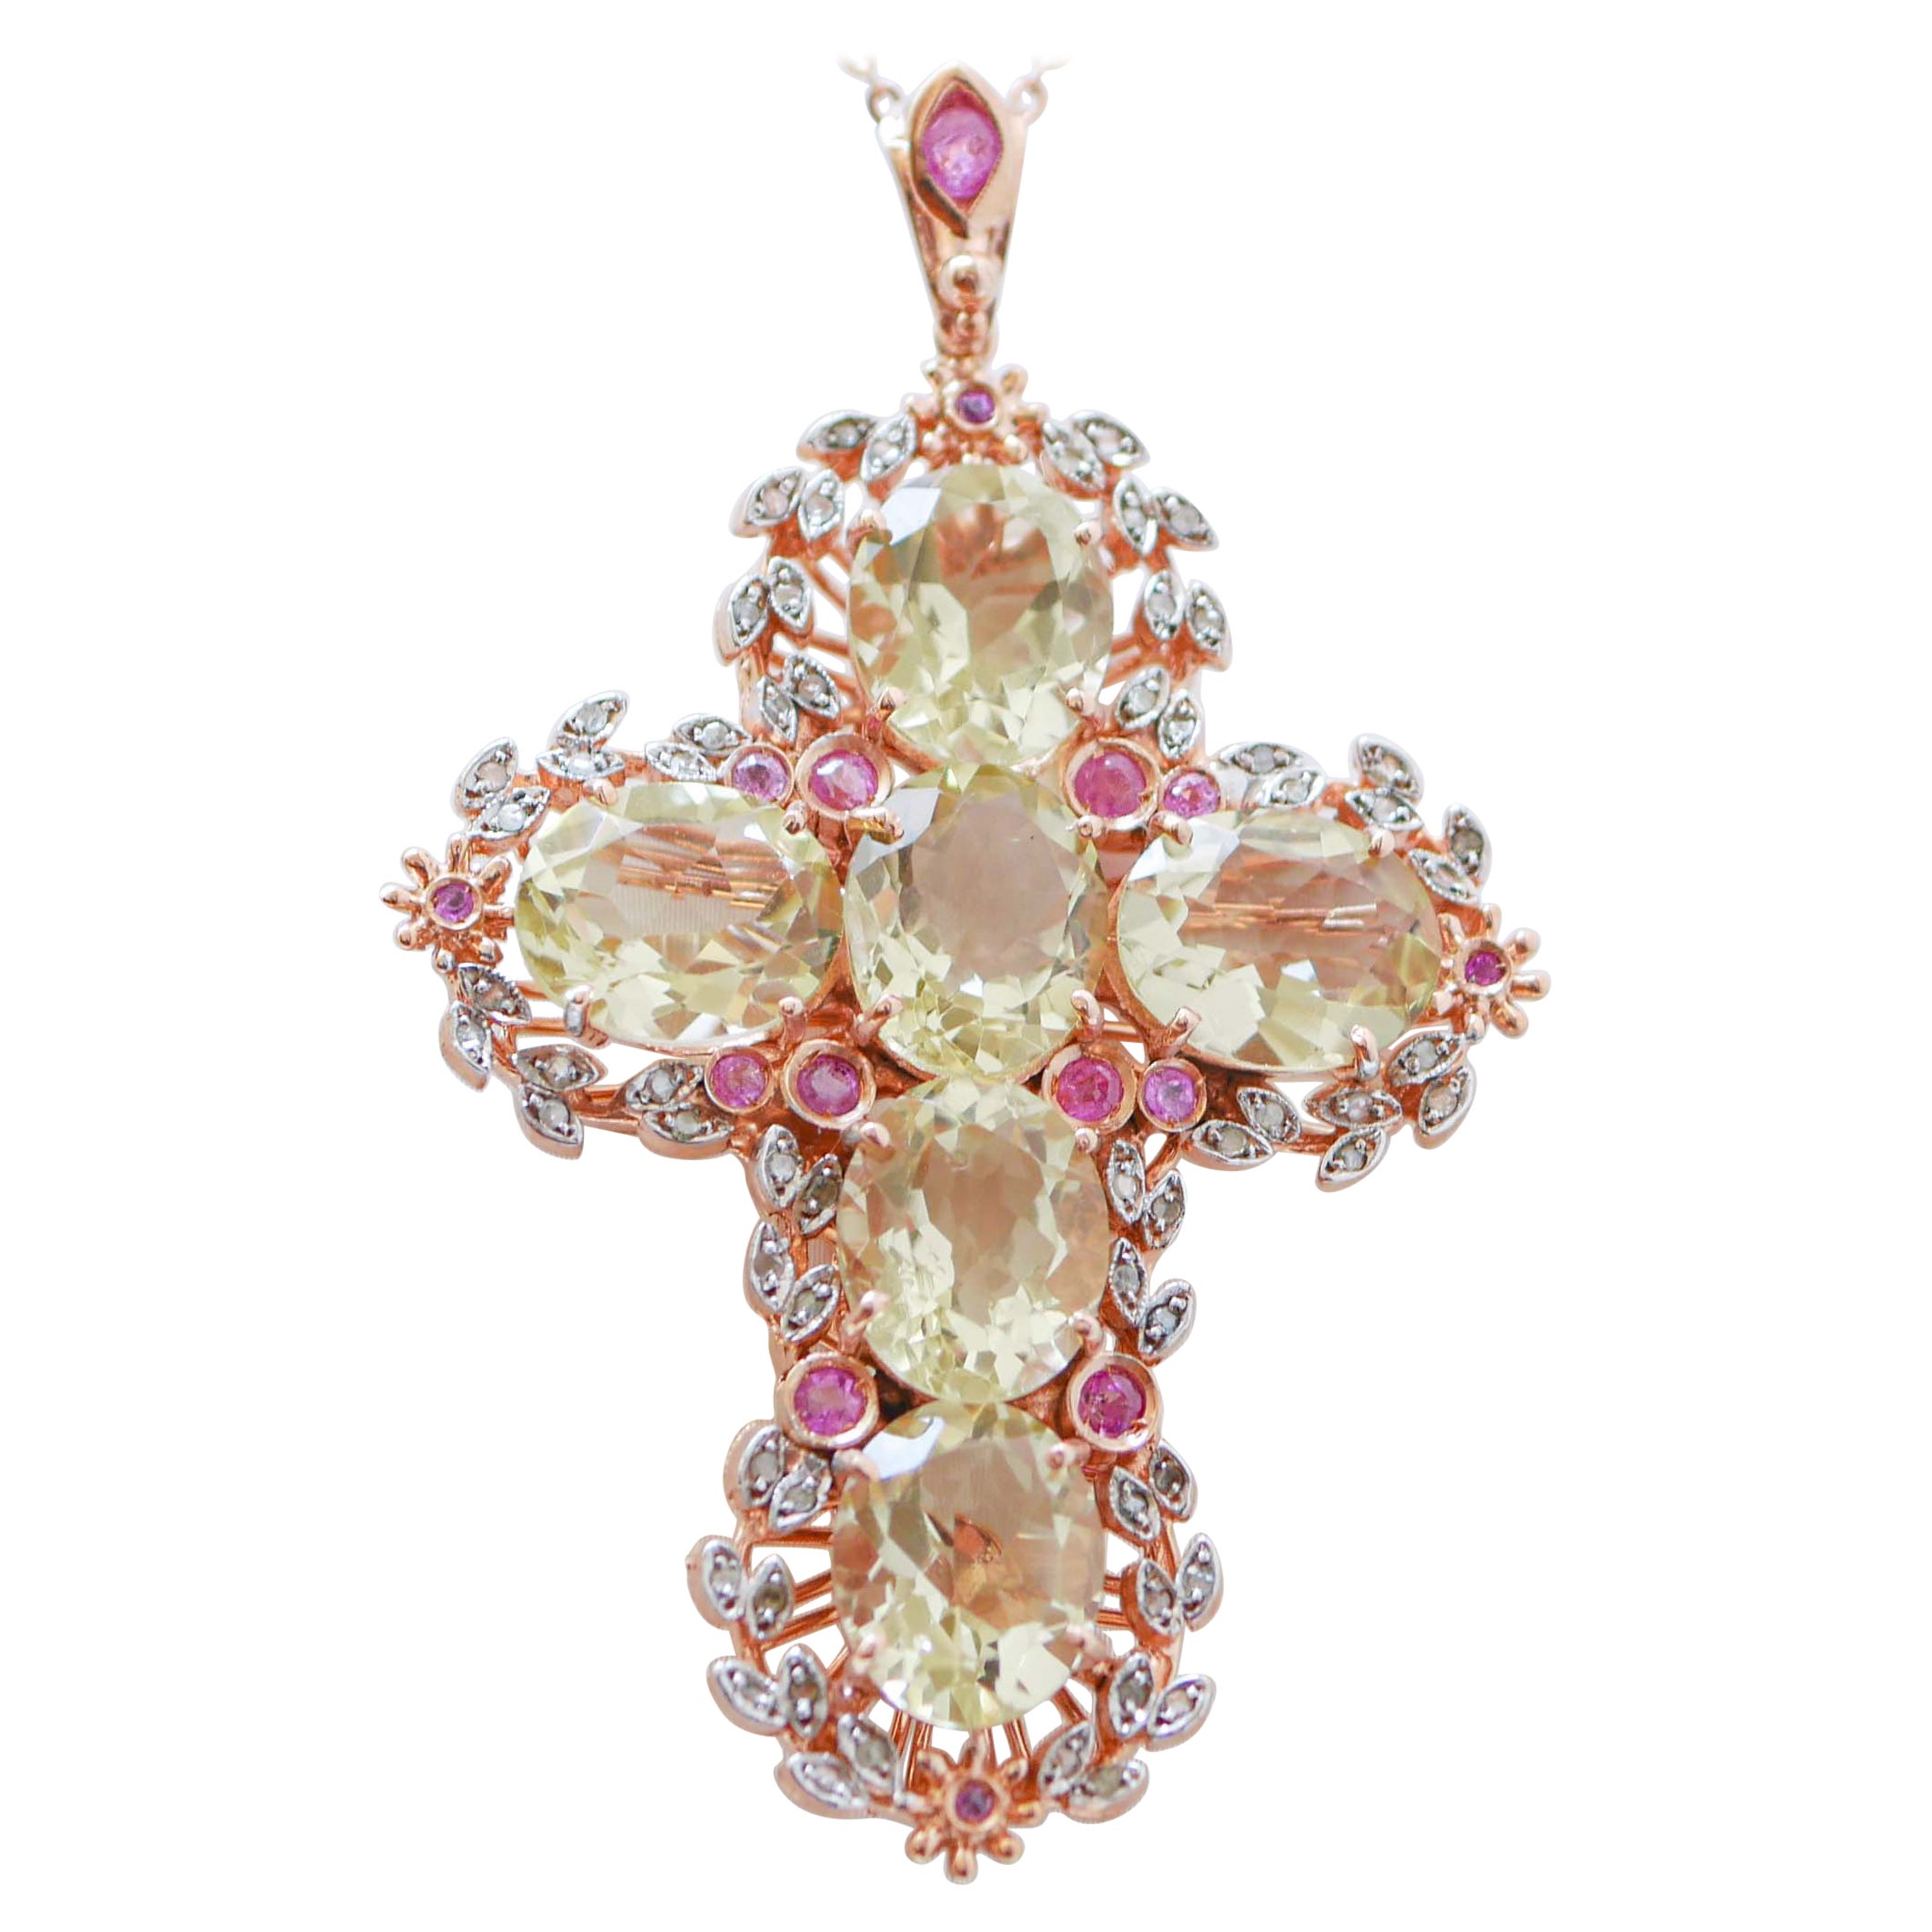 Topazs, Rubies, Diamonds, Rose Gold and Silver Cross  Pendant Necklace.